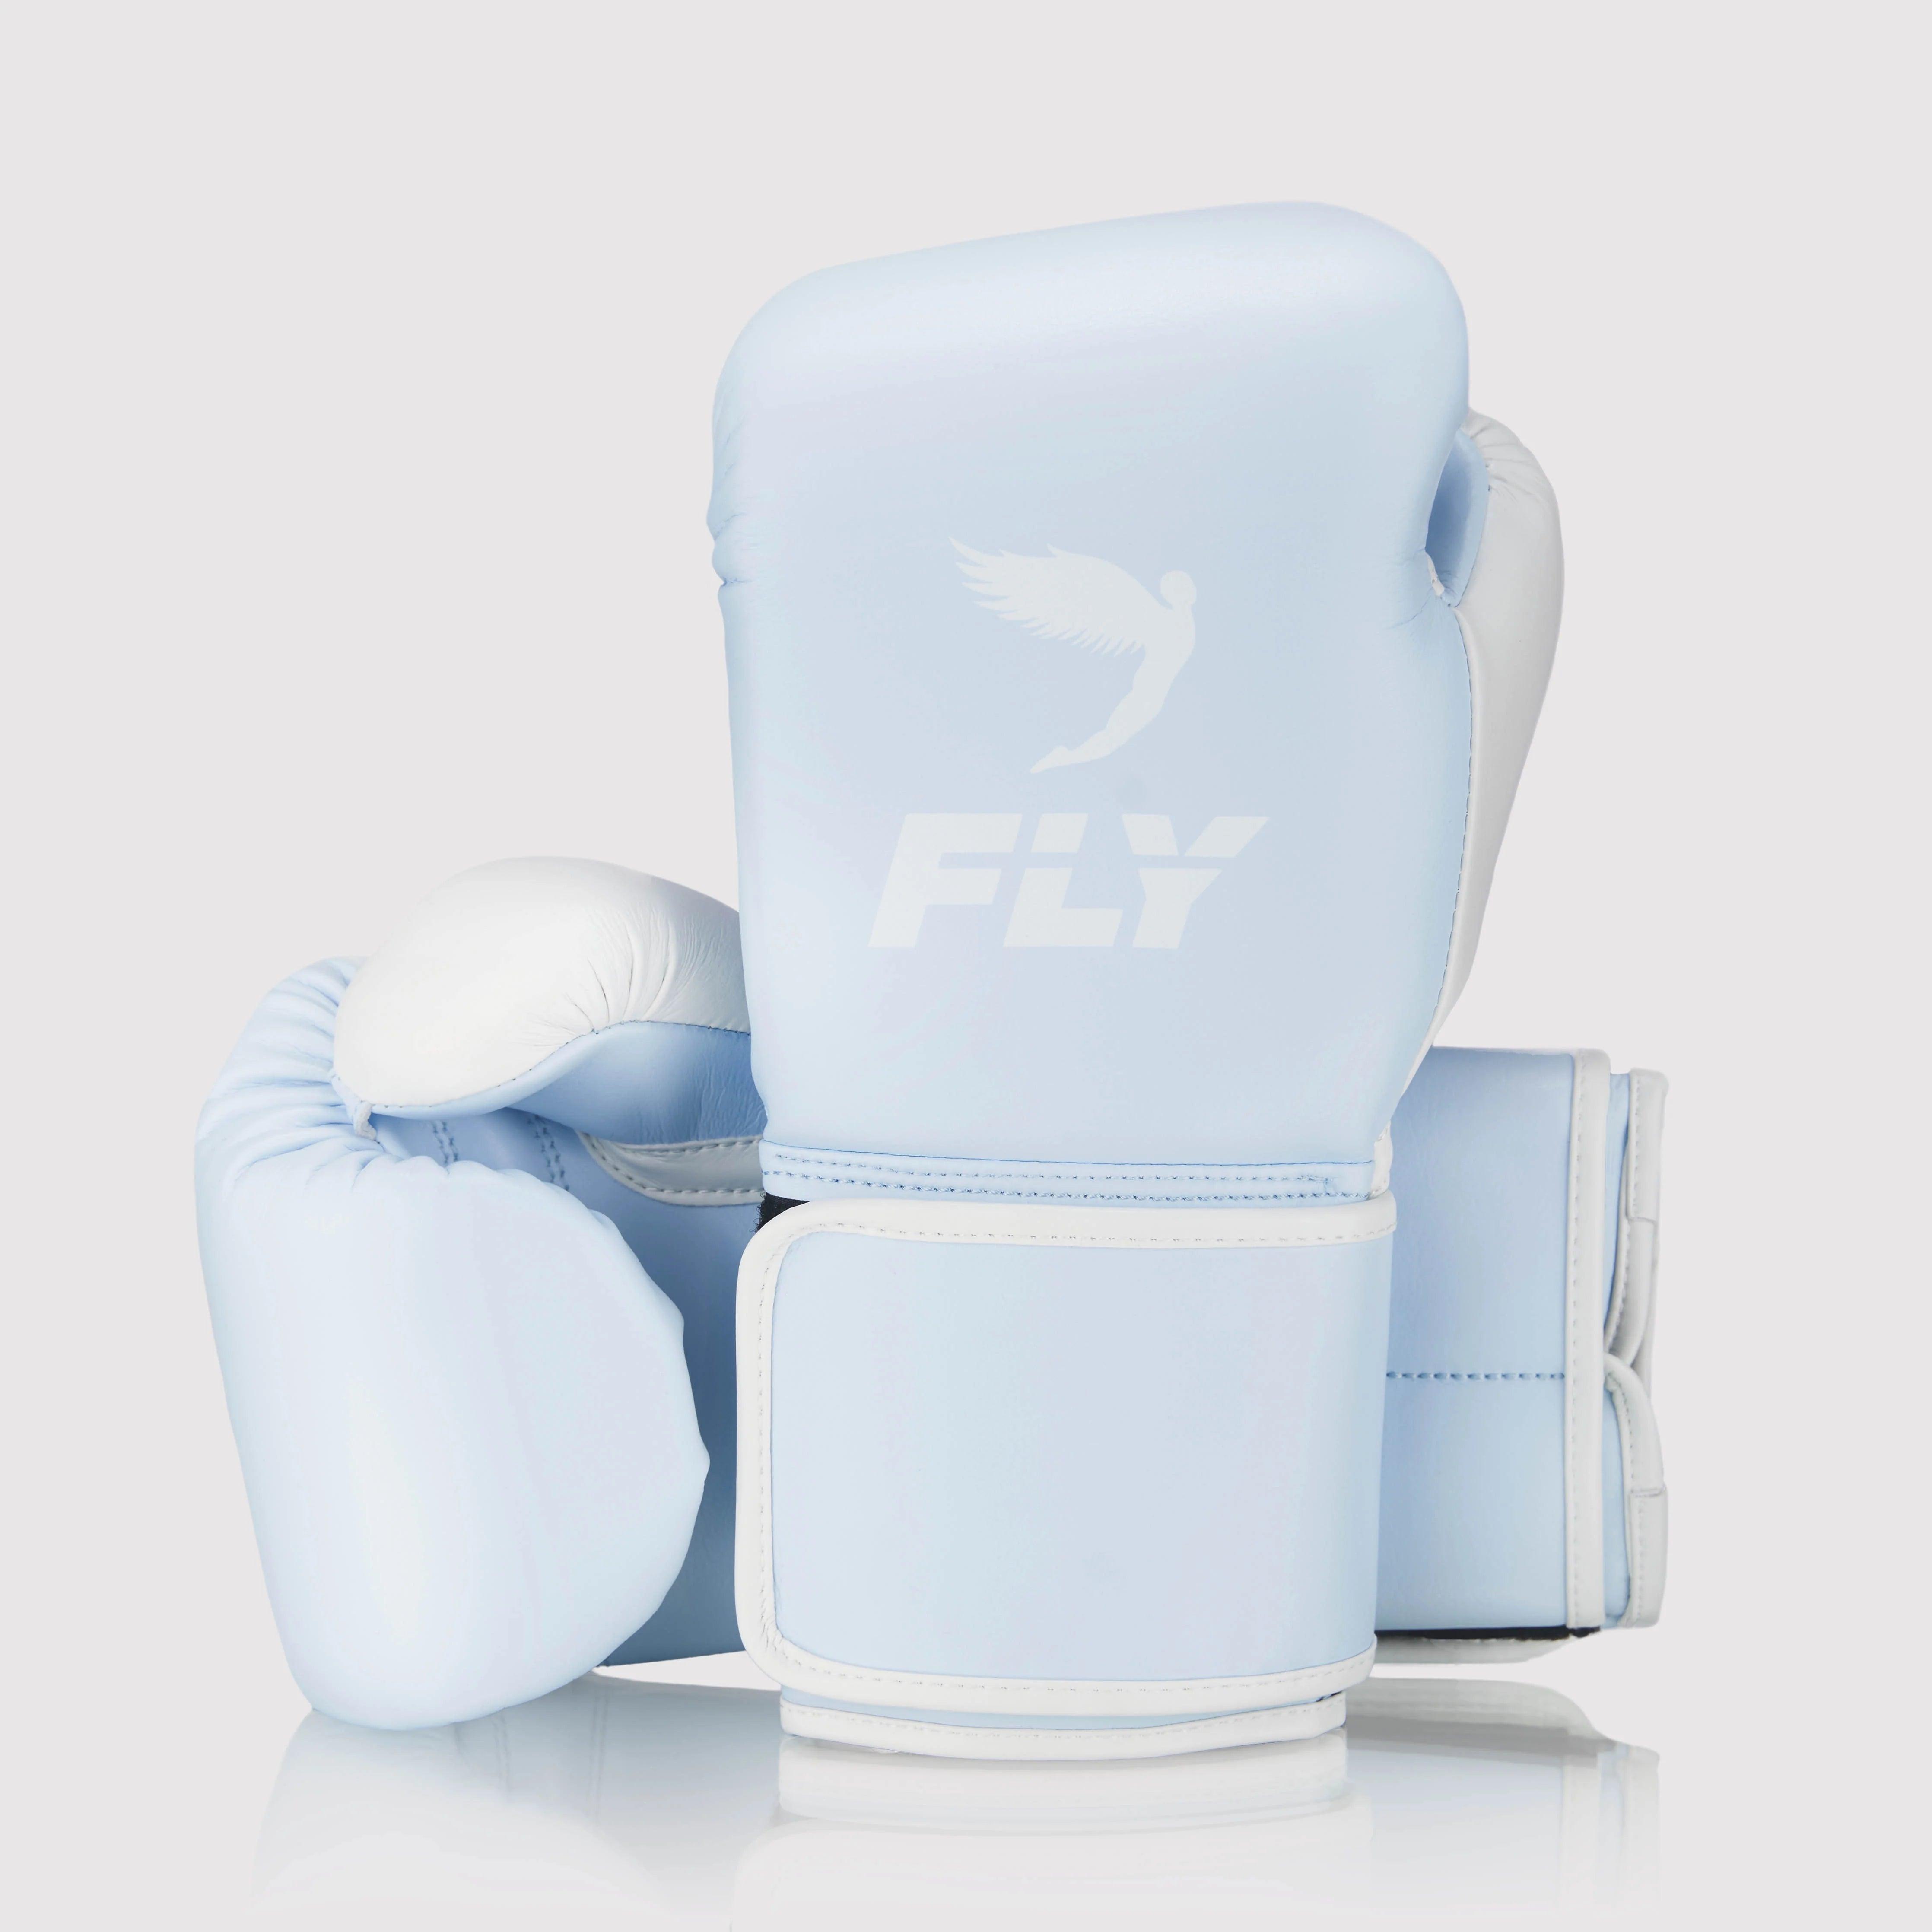 Fly Superloop X Pale Blue Gloves - RINGMASTER SPORTS - Made For Champions